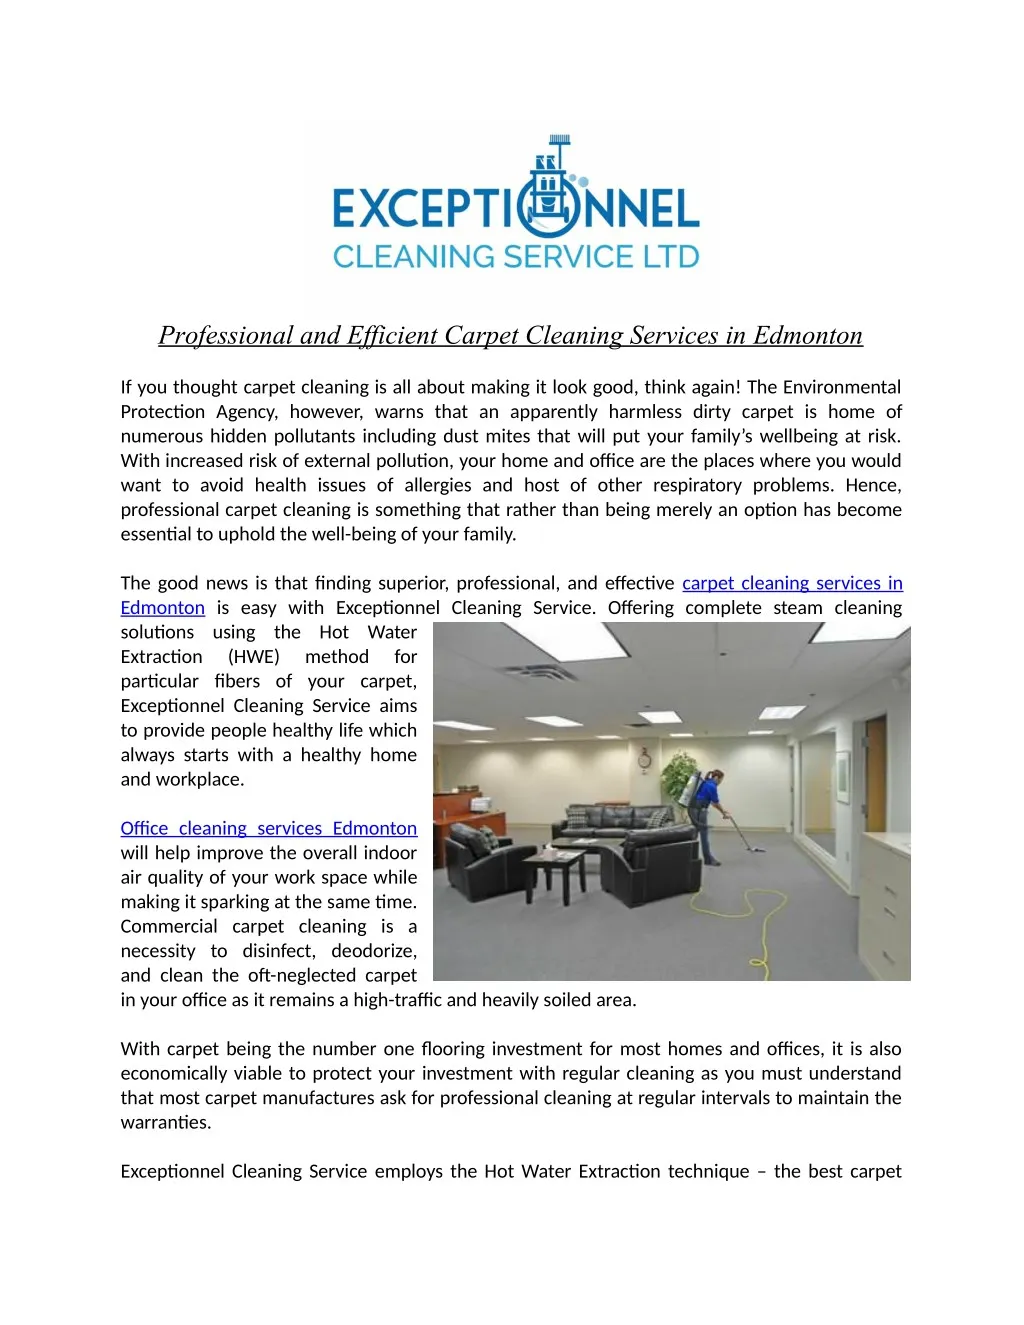 professional and efficient carpet cleaning